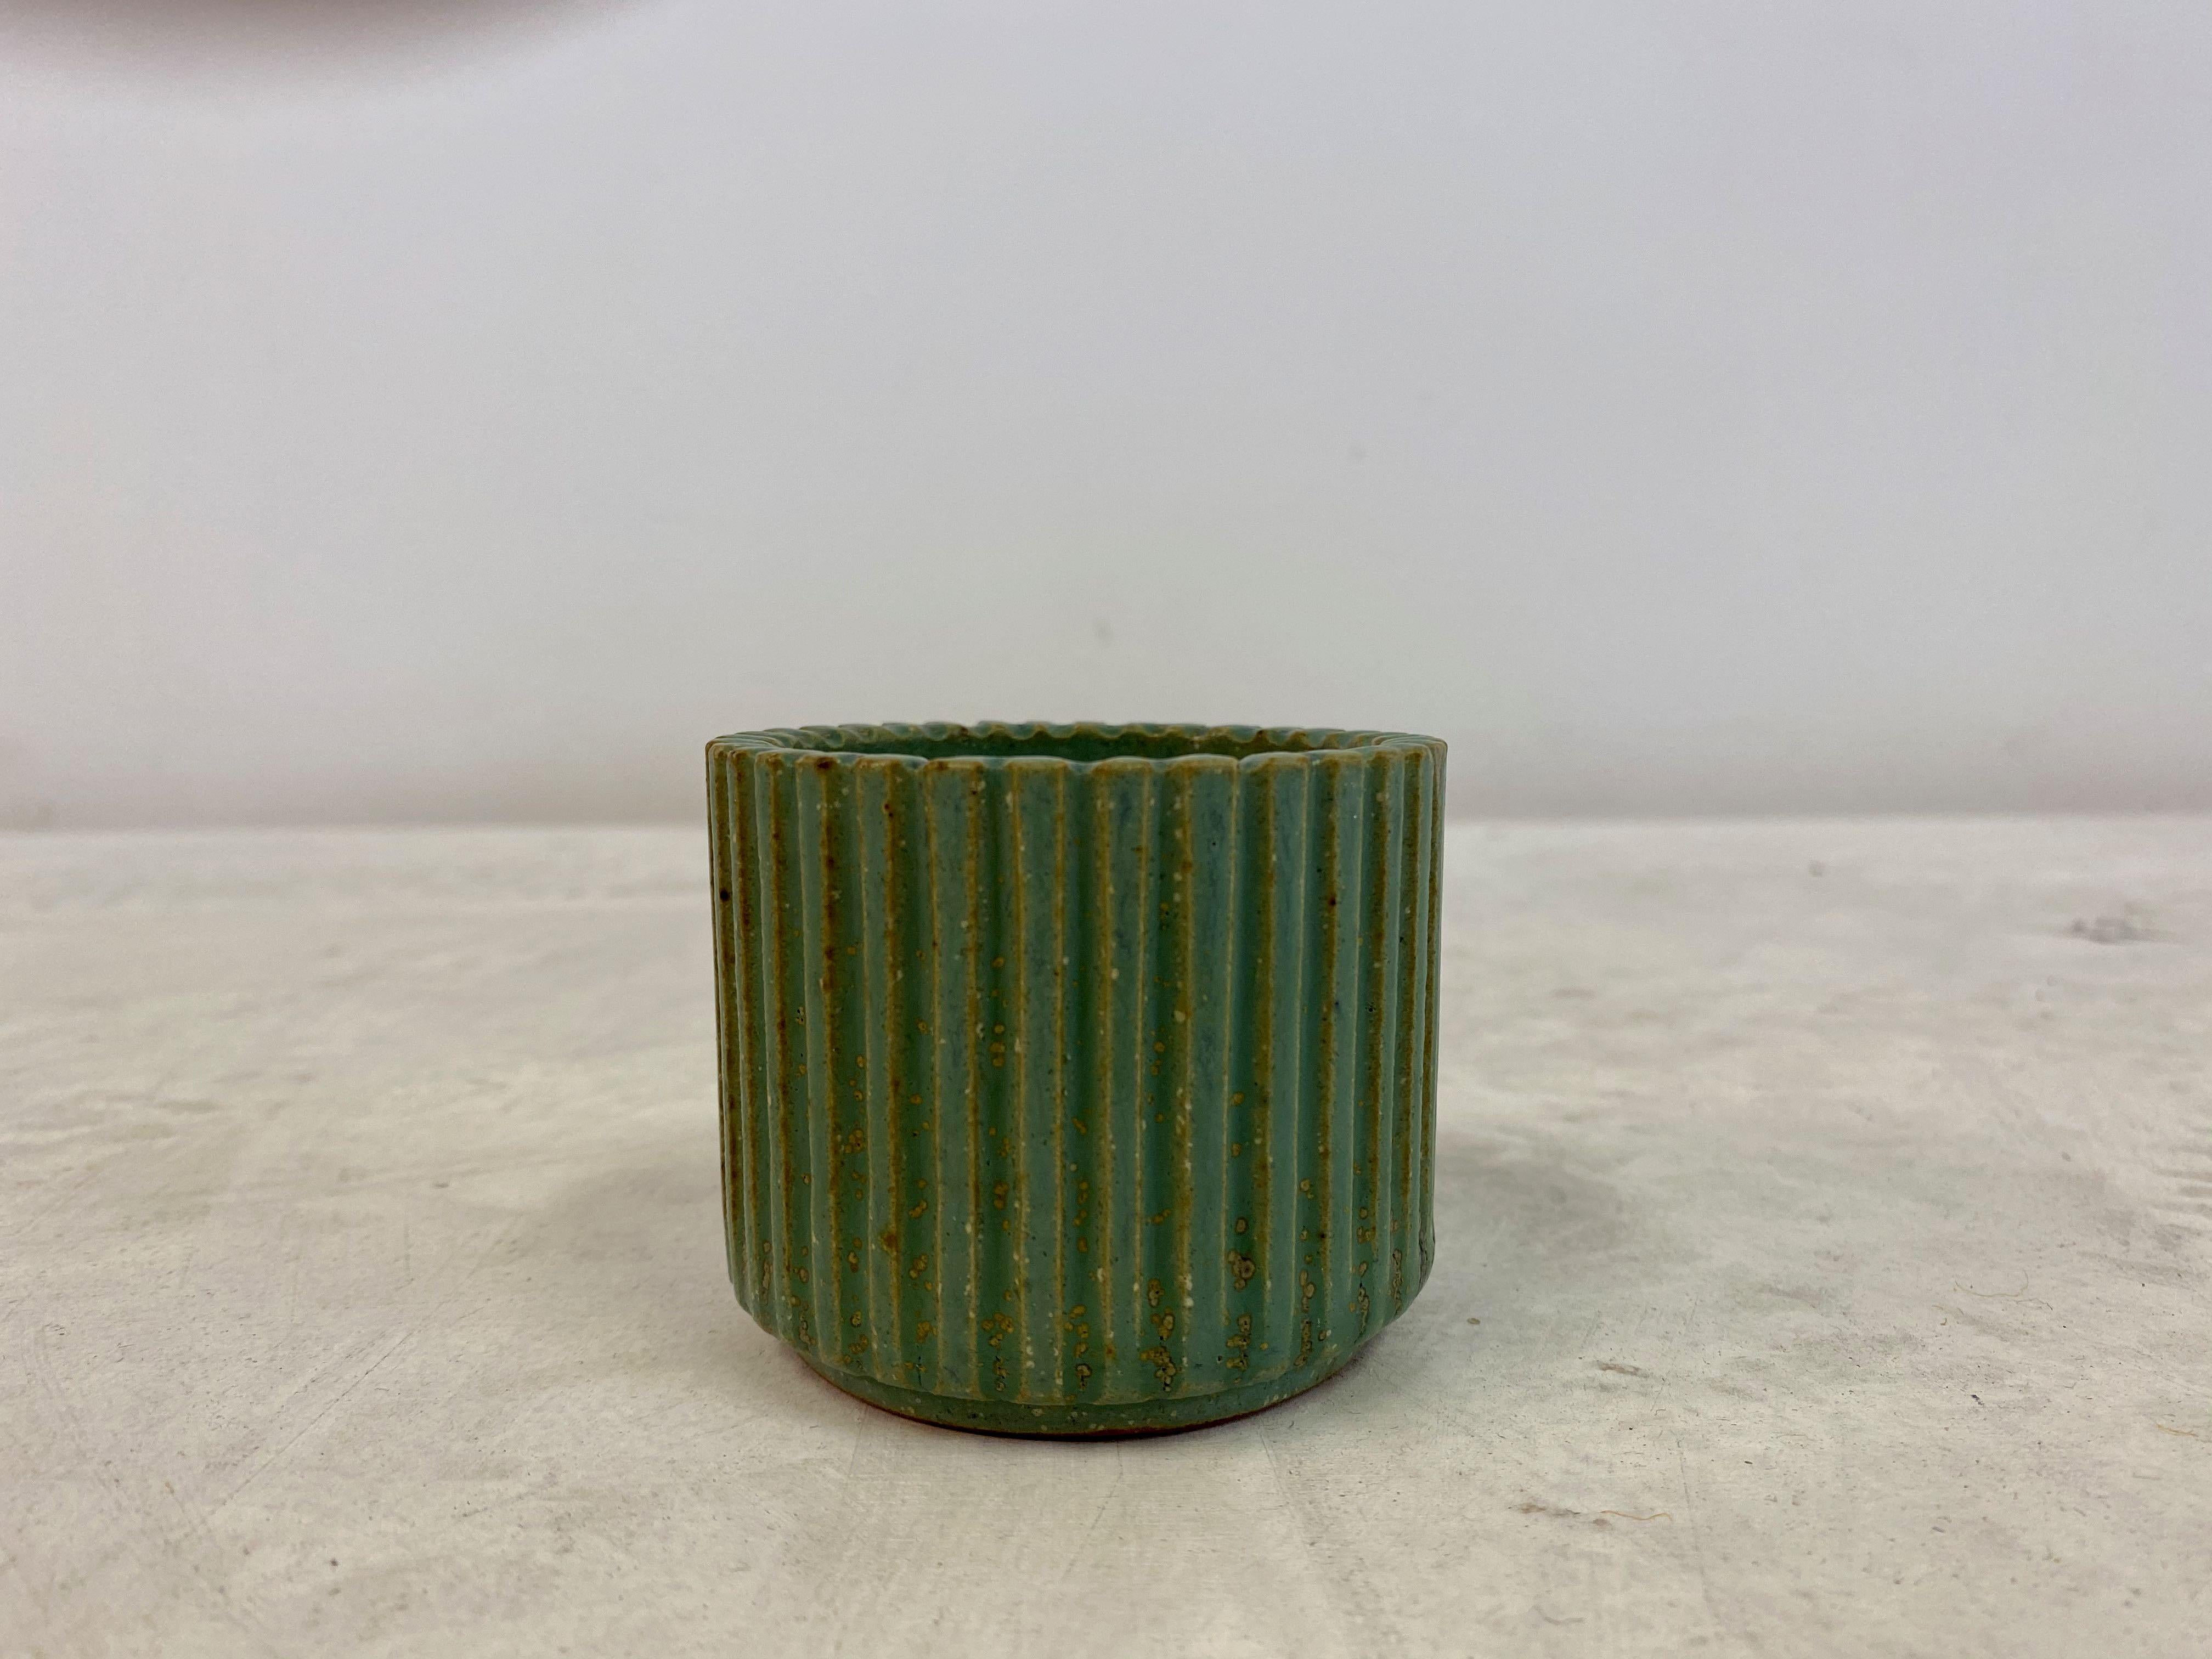 Stoneware ceramic pot

By Arne Bang

Green glaze

Numbered 128

Signed with monogram

Danish 1940s

Last photo shows selection of ceramics available.